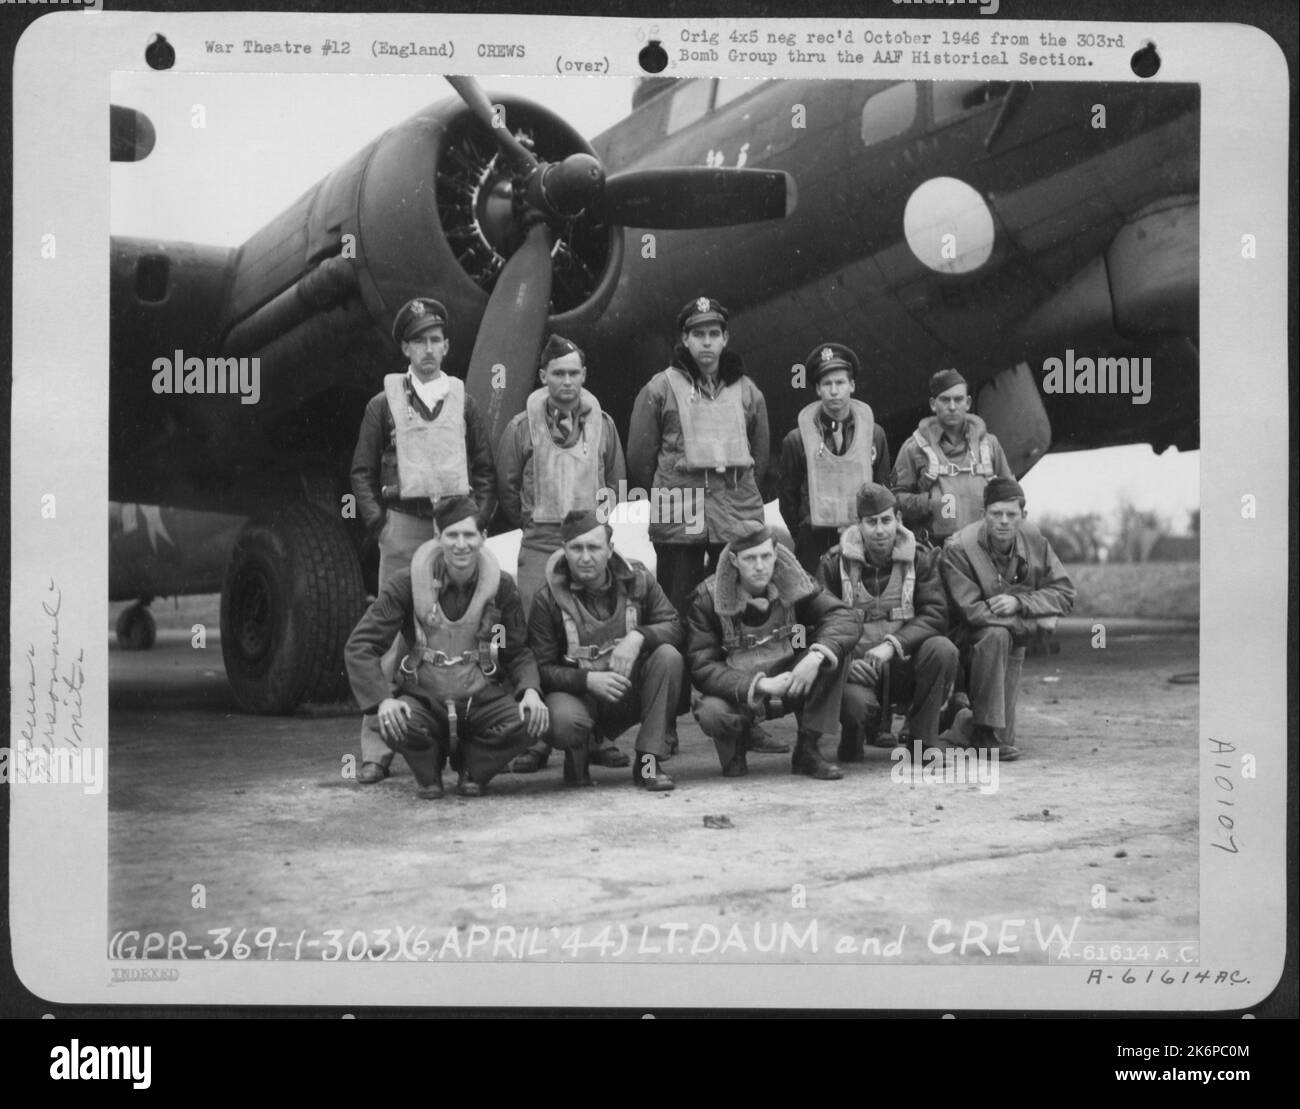 Lt. Daum And Crew Of The 359Th Bomb Squadron, 303Rd Bomb Group Based In England, Pose In Front Of A Boeing B-17 Flying Fortress. 6 April 1944. Name Appears To Be 'Thunderbird' Nose Art Is Incomplete. Stock Photo